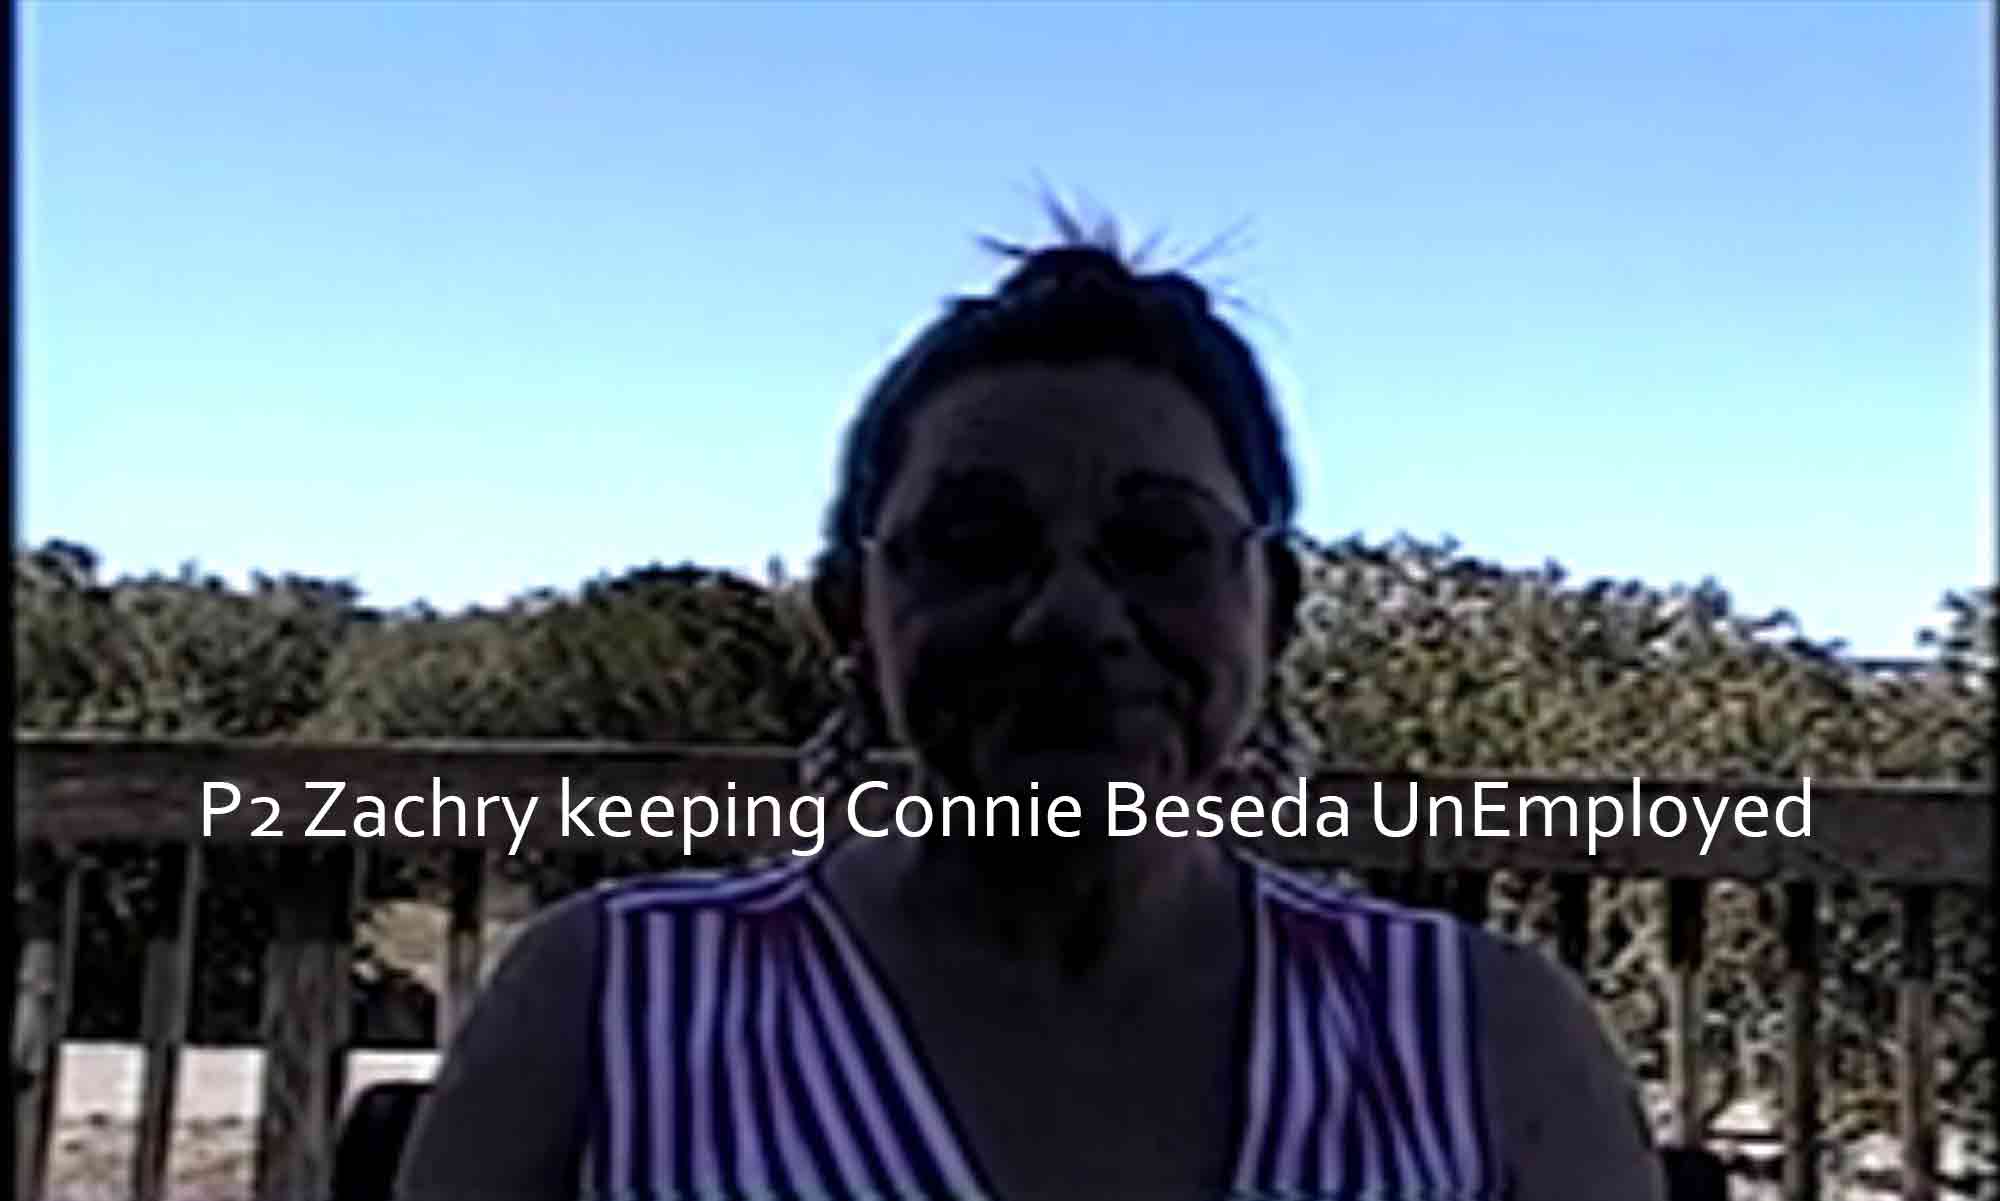 EP3 ZACHRY keeping CONNIE BESEDA UnEmployed